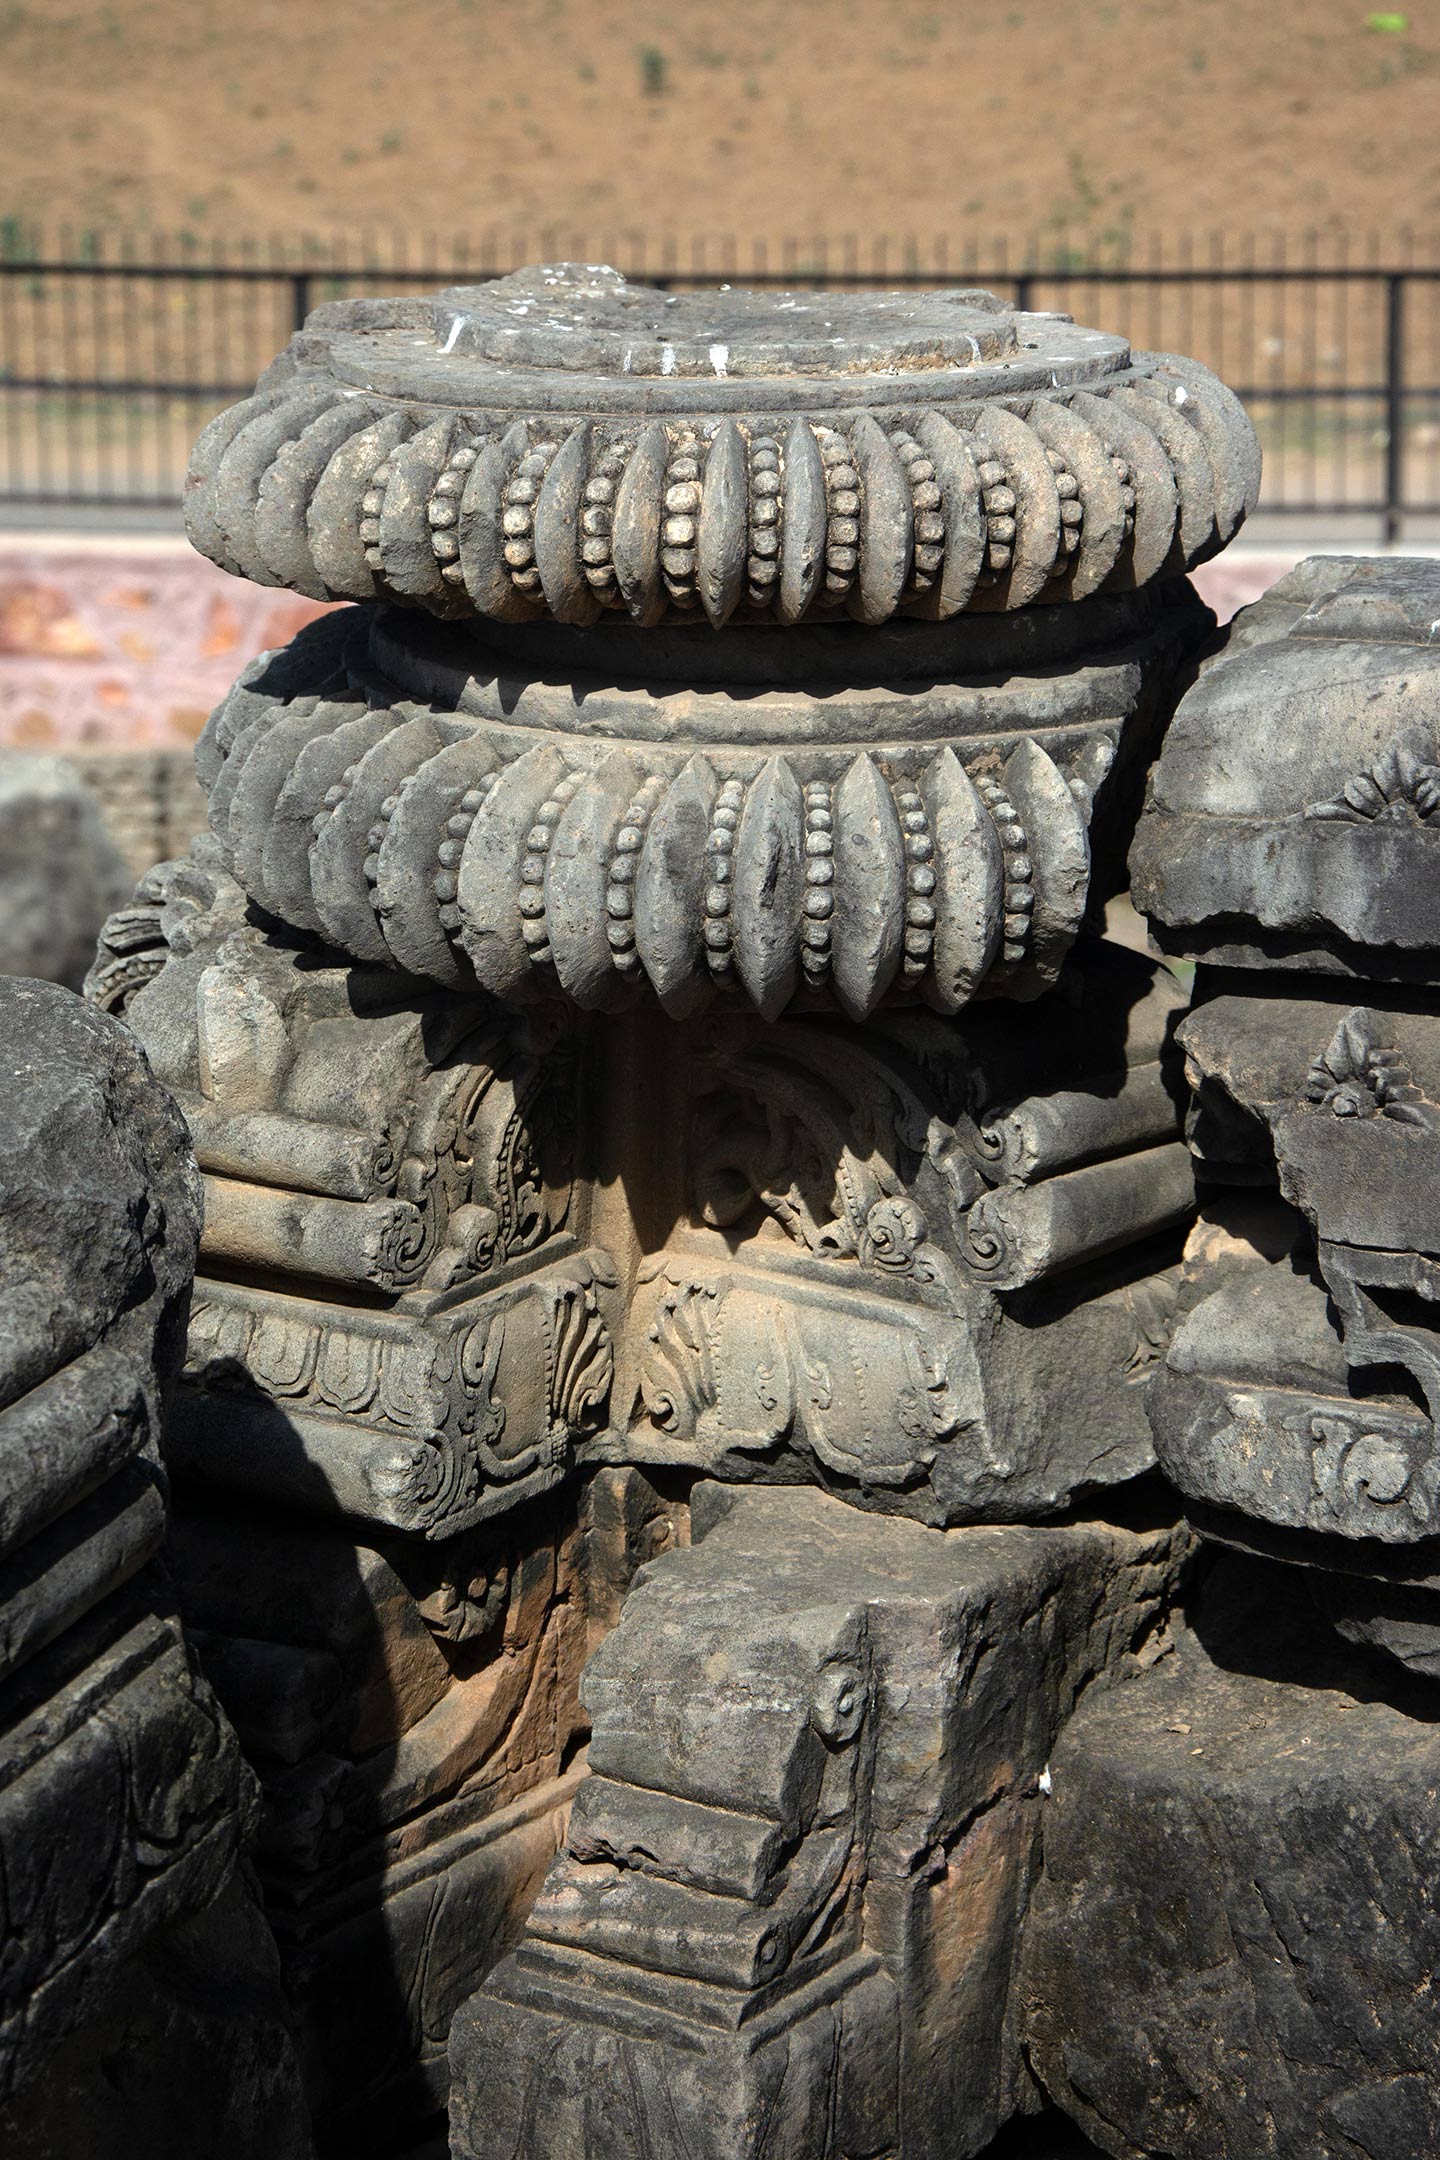 Most fragments assembled here were once part of the shikhara of the original temple, other subsidiary structures, and associated parts like the amalaka (notched disc) as seen here.